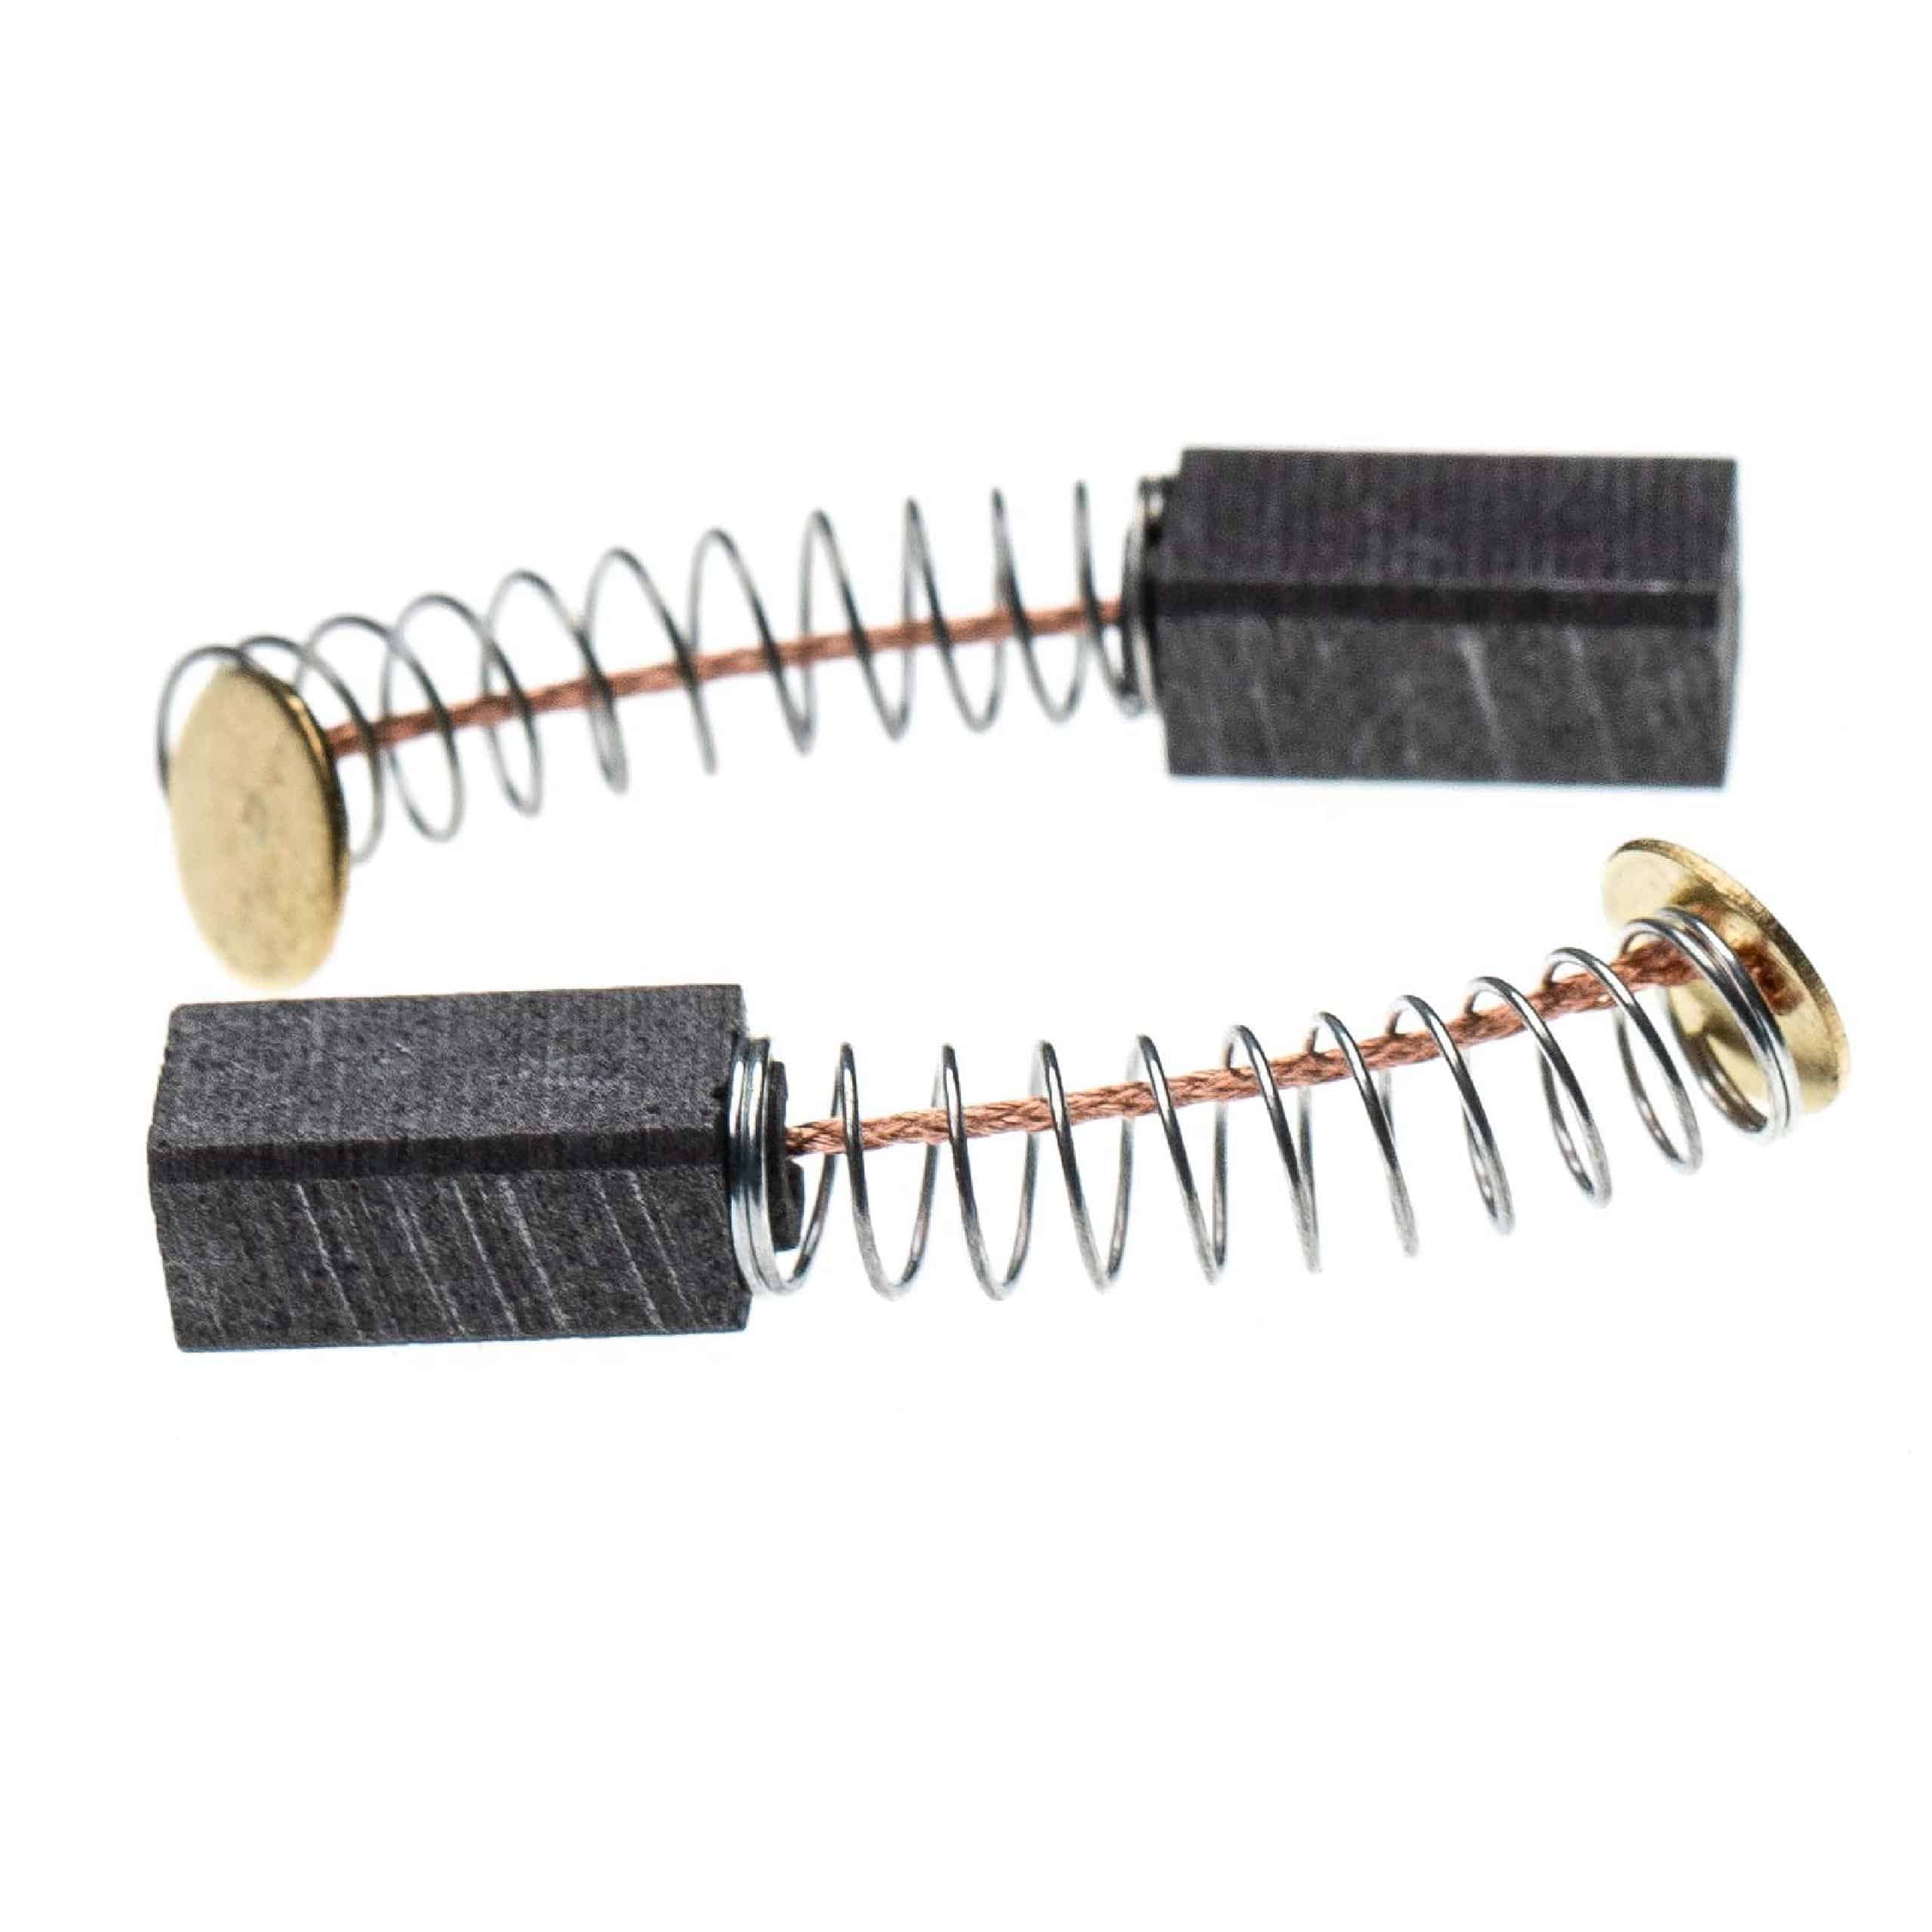 2x Carbon Brush as Replacement for Hitachi 999-054 Electric Power Tools, 12 x 6 x 5mm